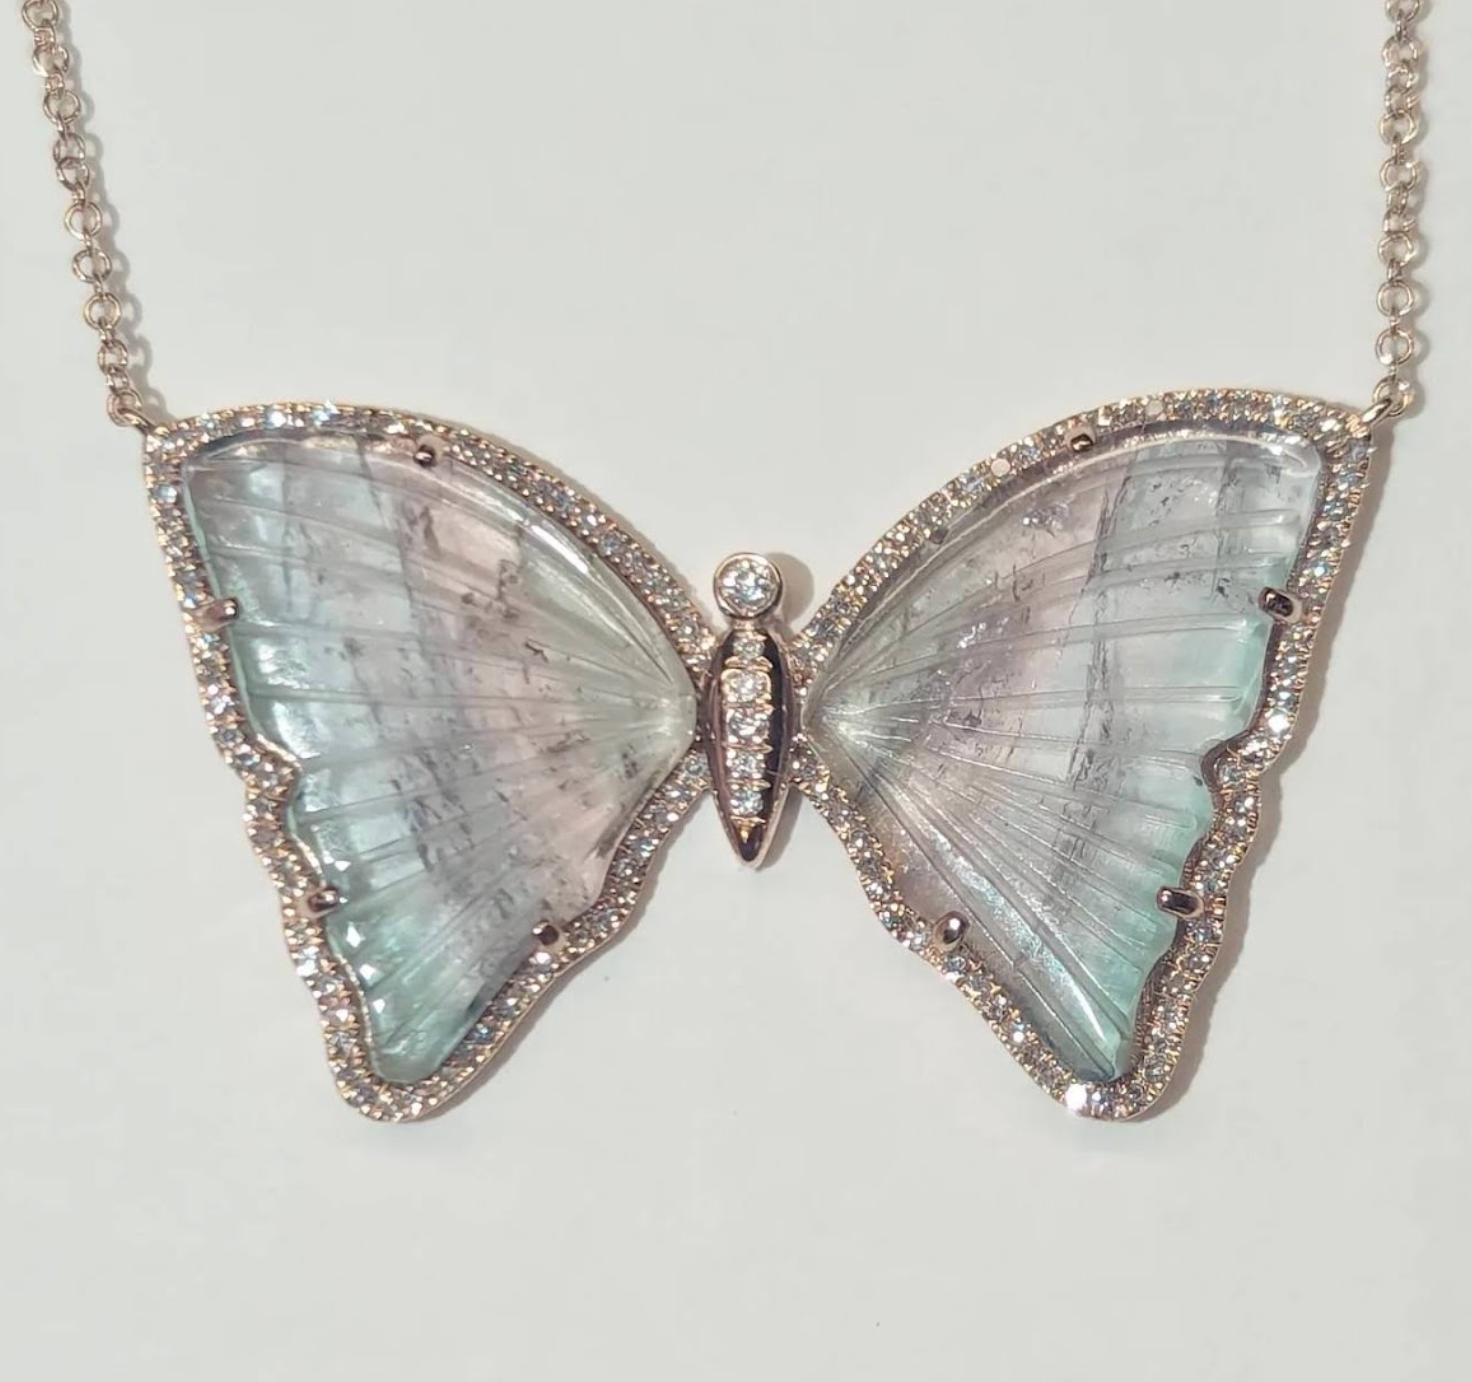 Large Mauve Multi-colored Pastel Tourmaline Butterfly Necklace with Diamonds